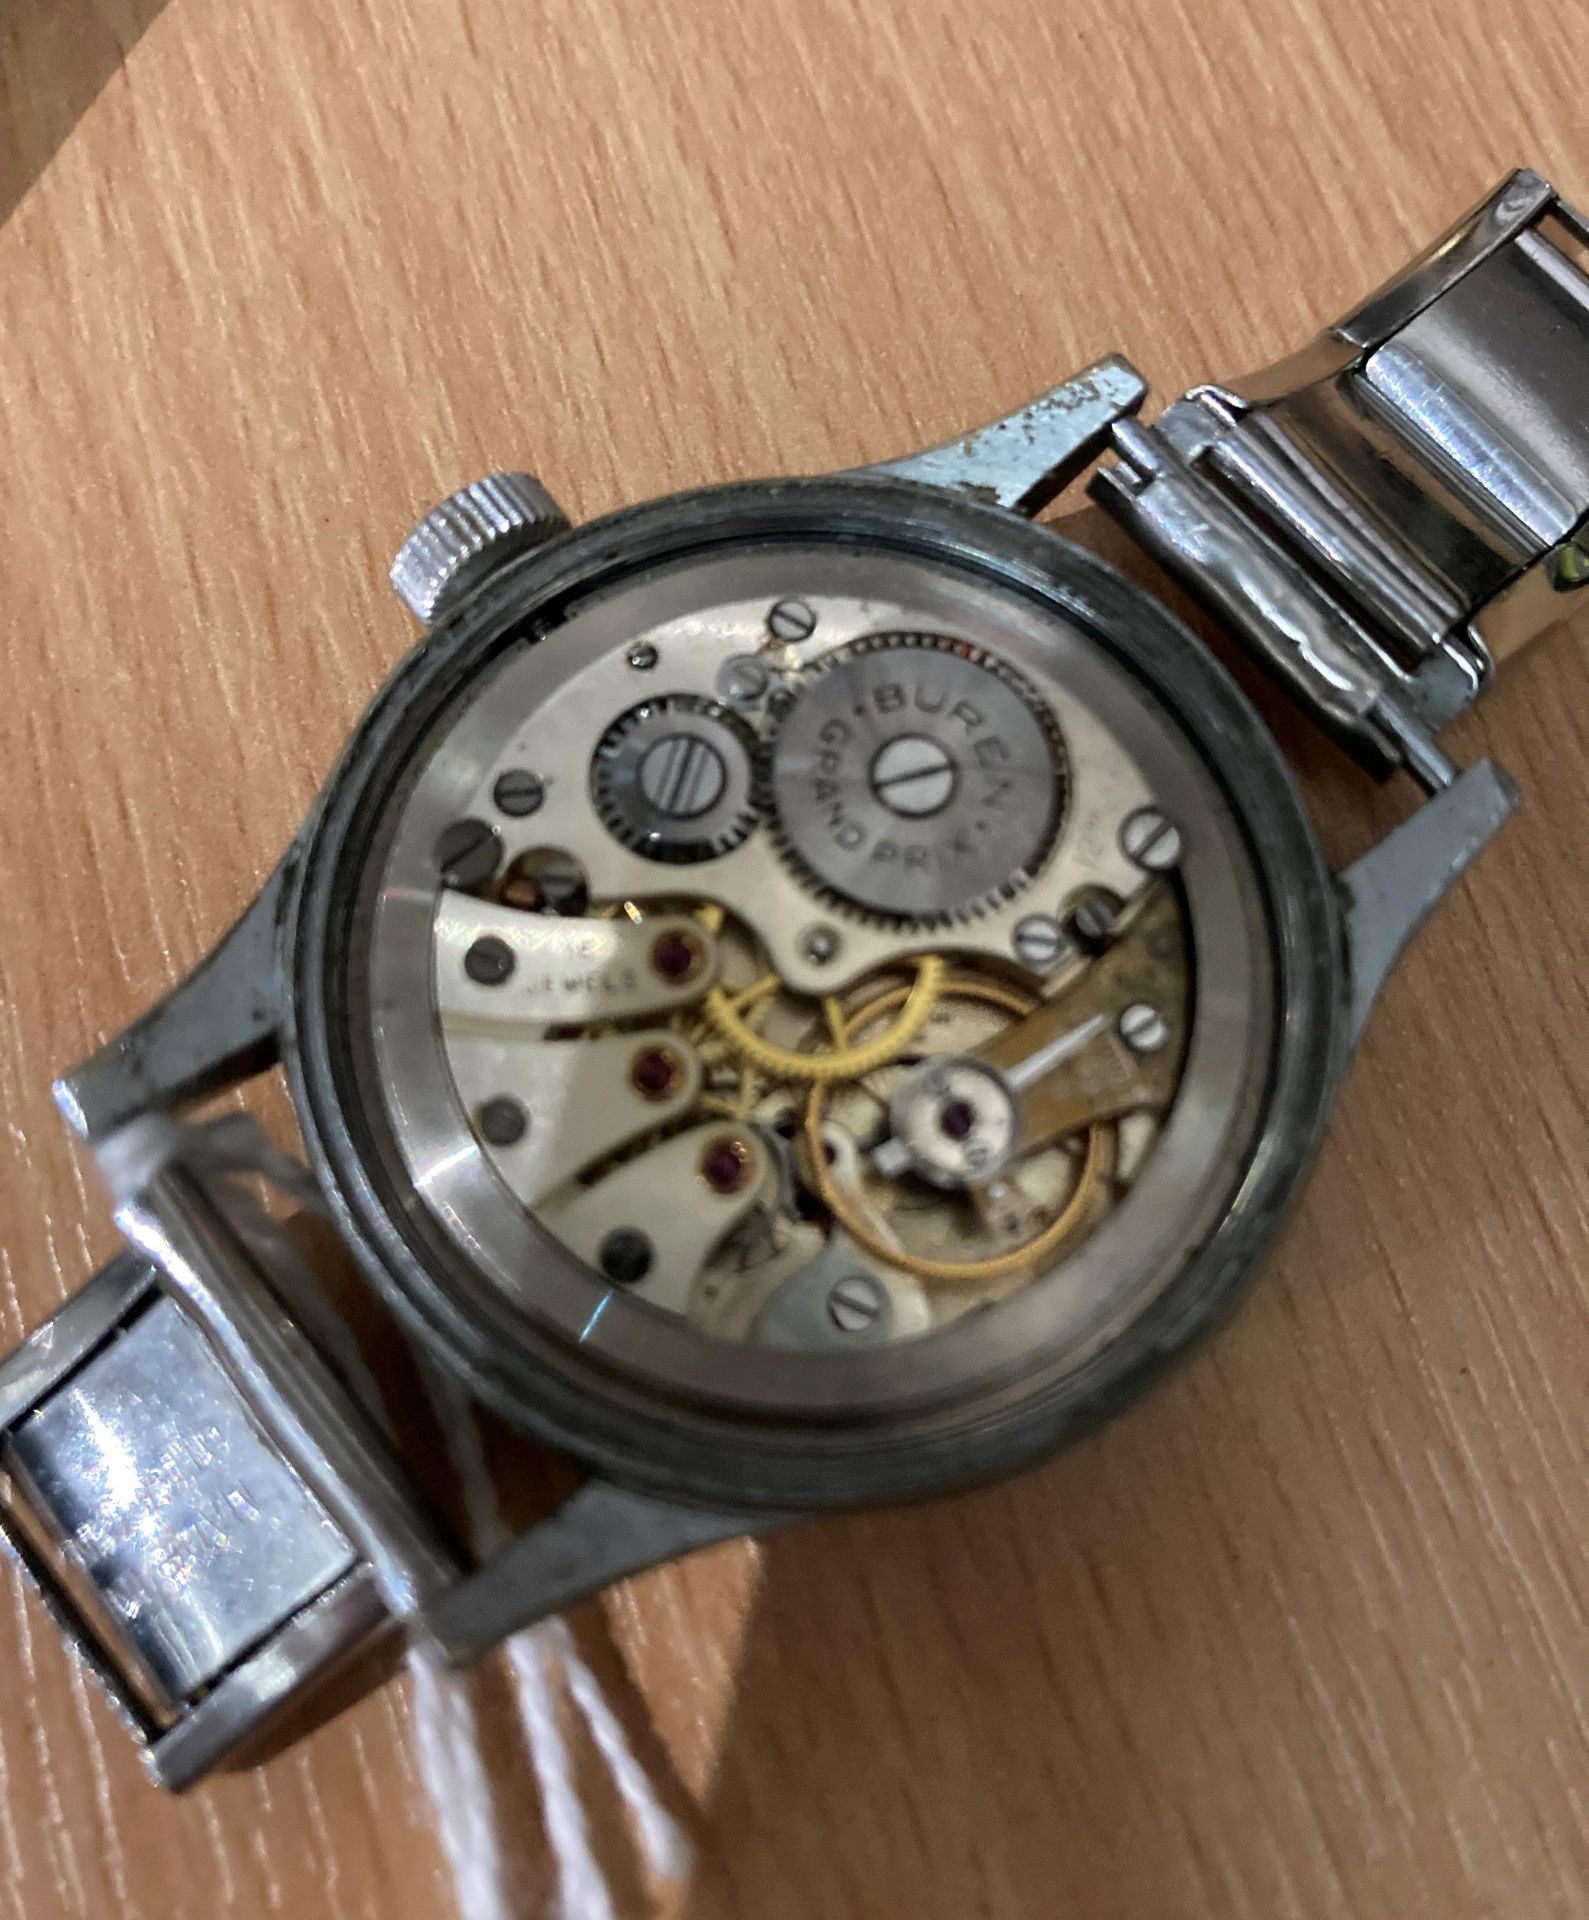 Military issue 'Buren - Grand Prix' WWW Dirty Dozen British Army watch with marking to back, - Image 5 of 9